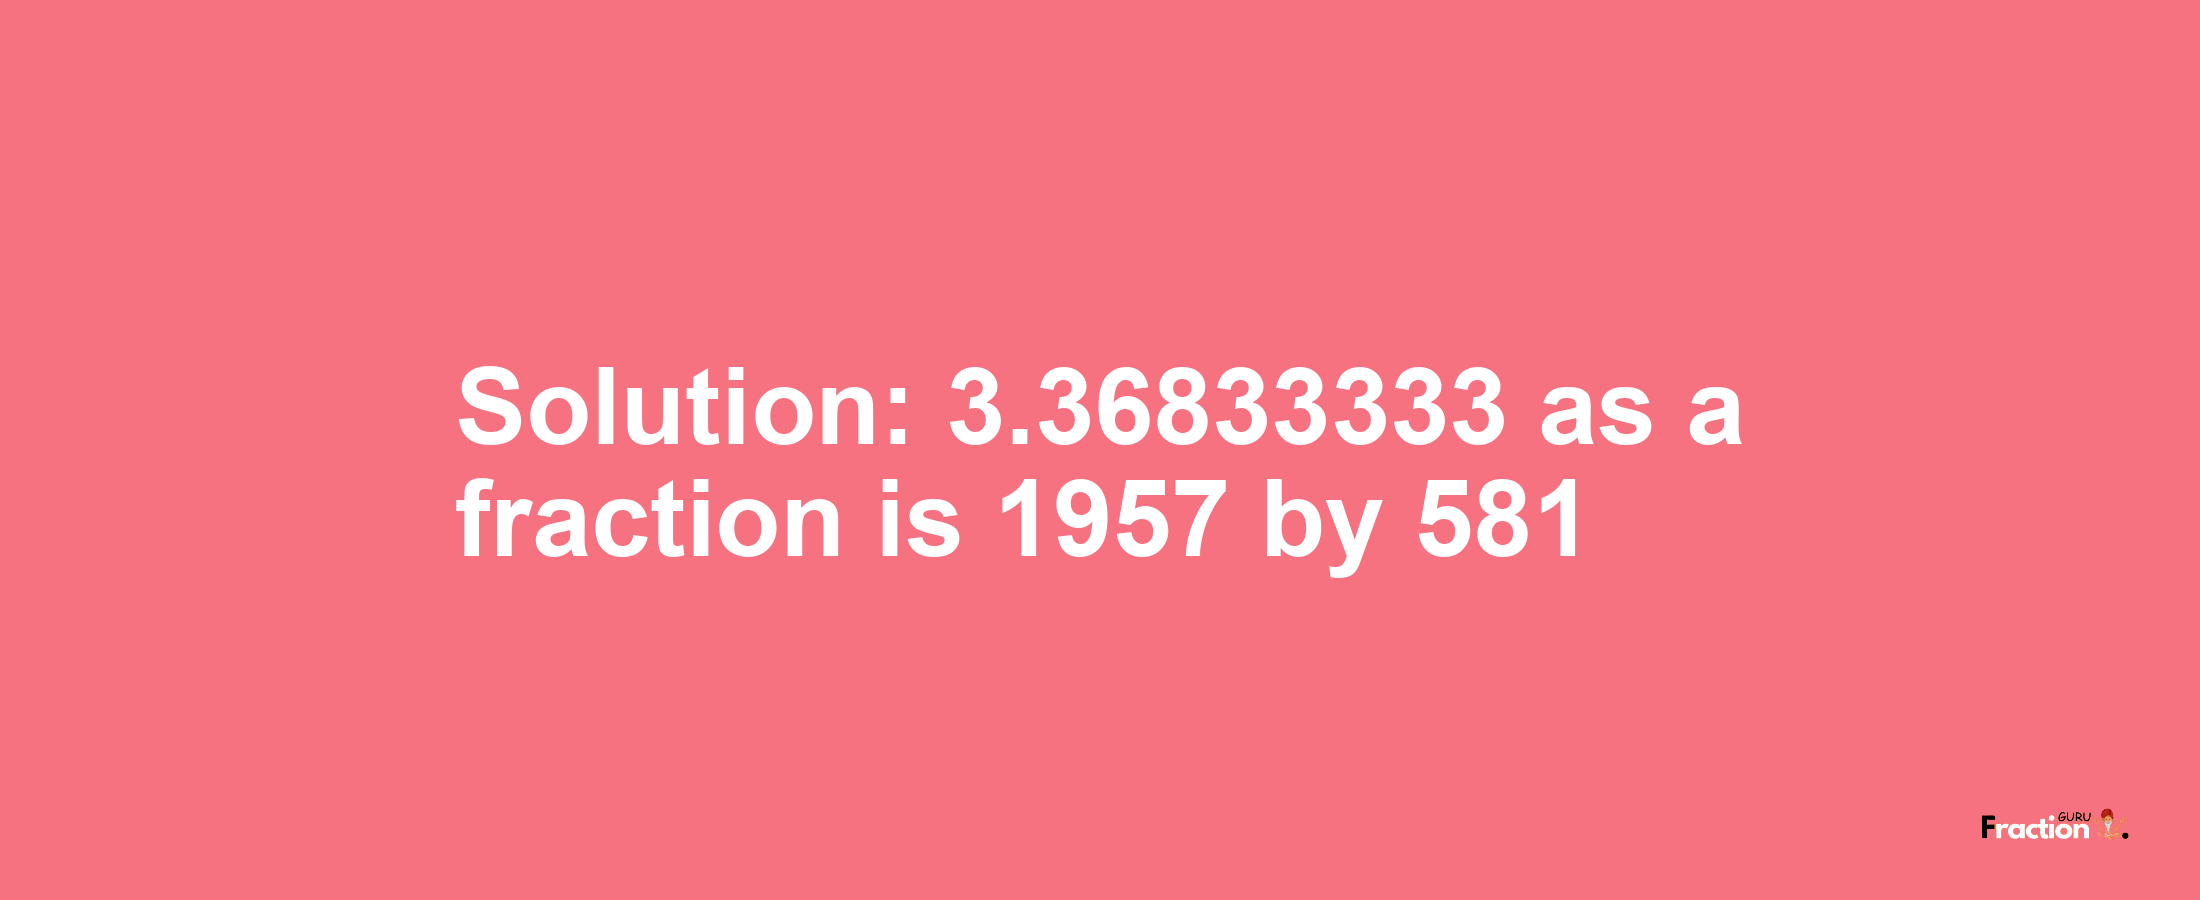 Solution:3.36833333 as a fraction is 1957/581